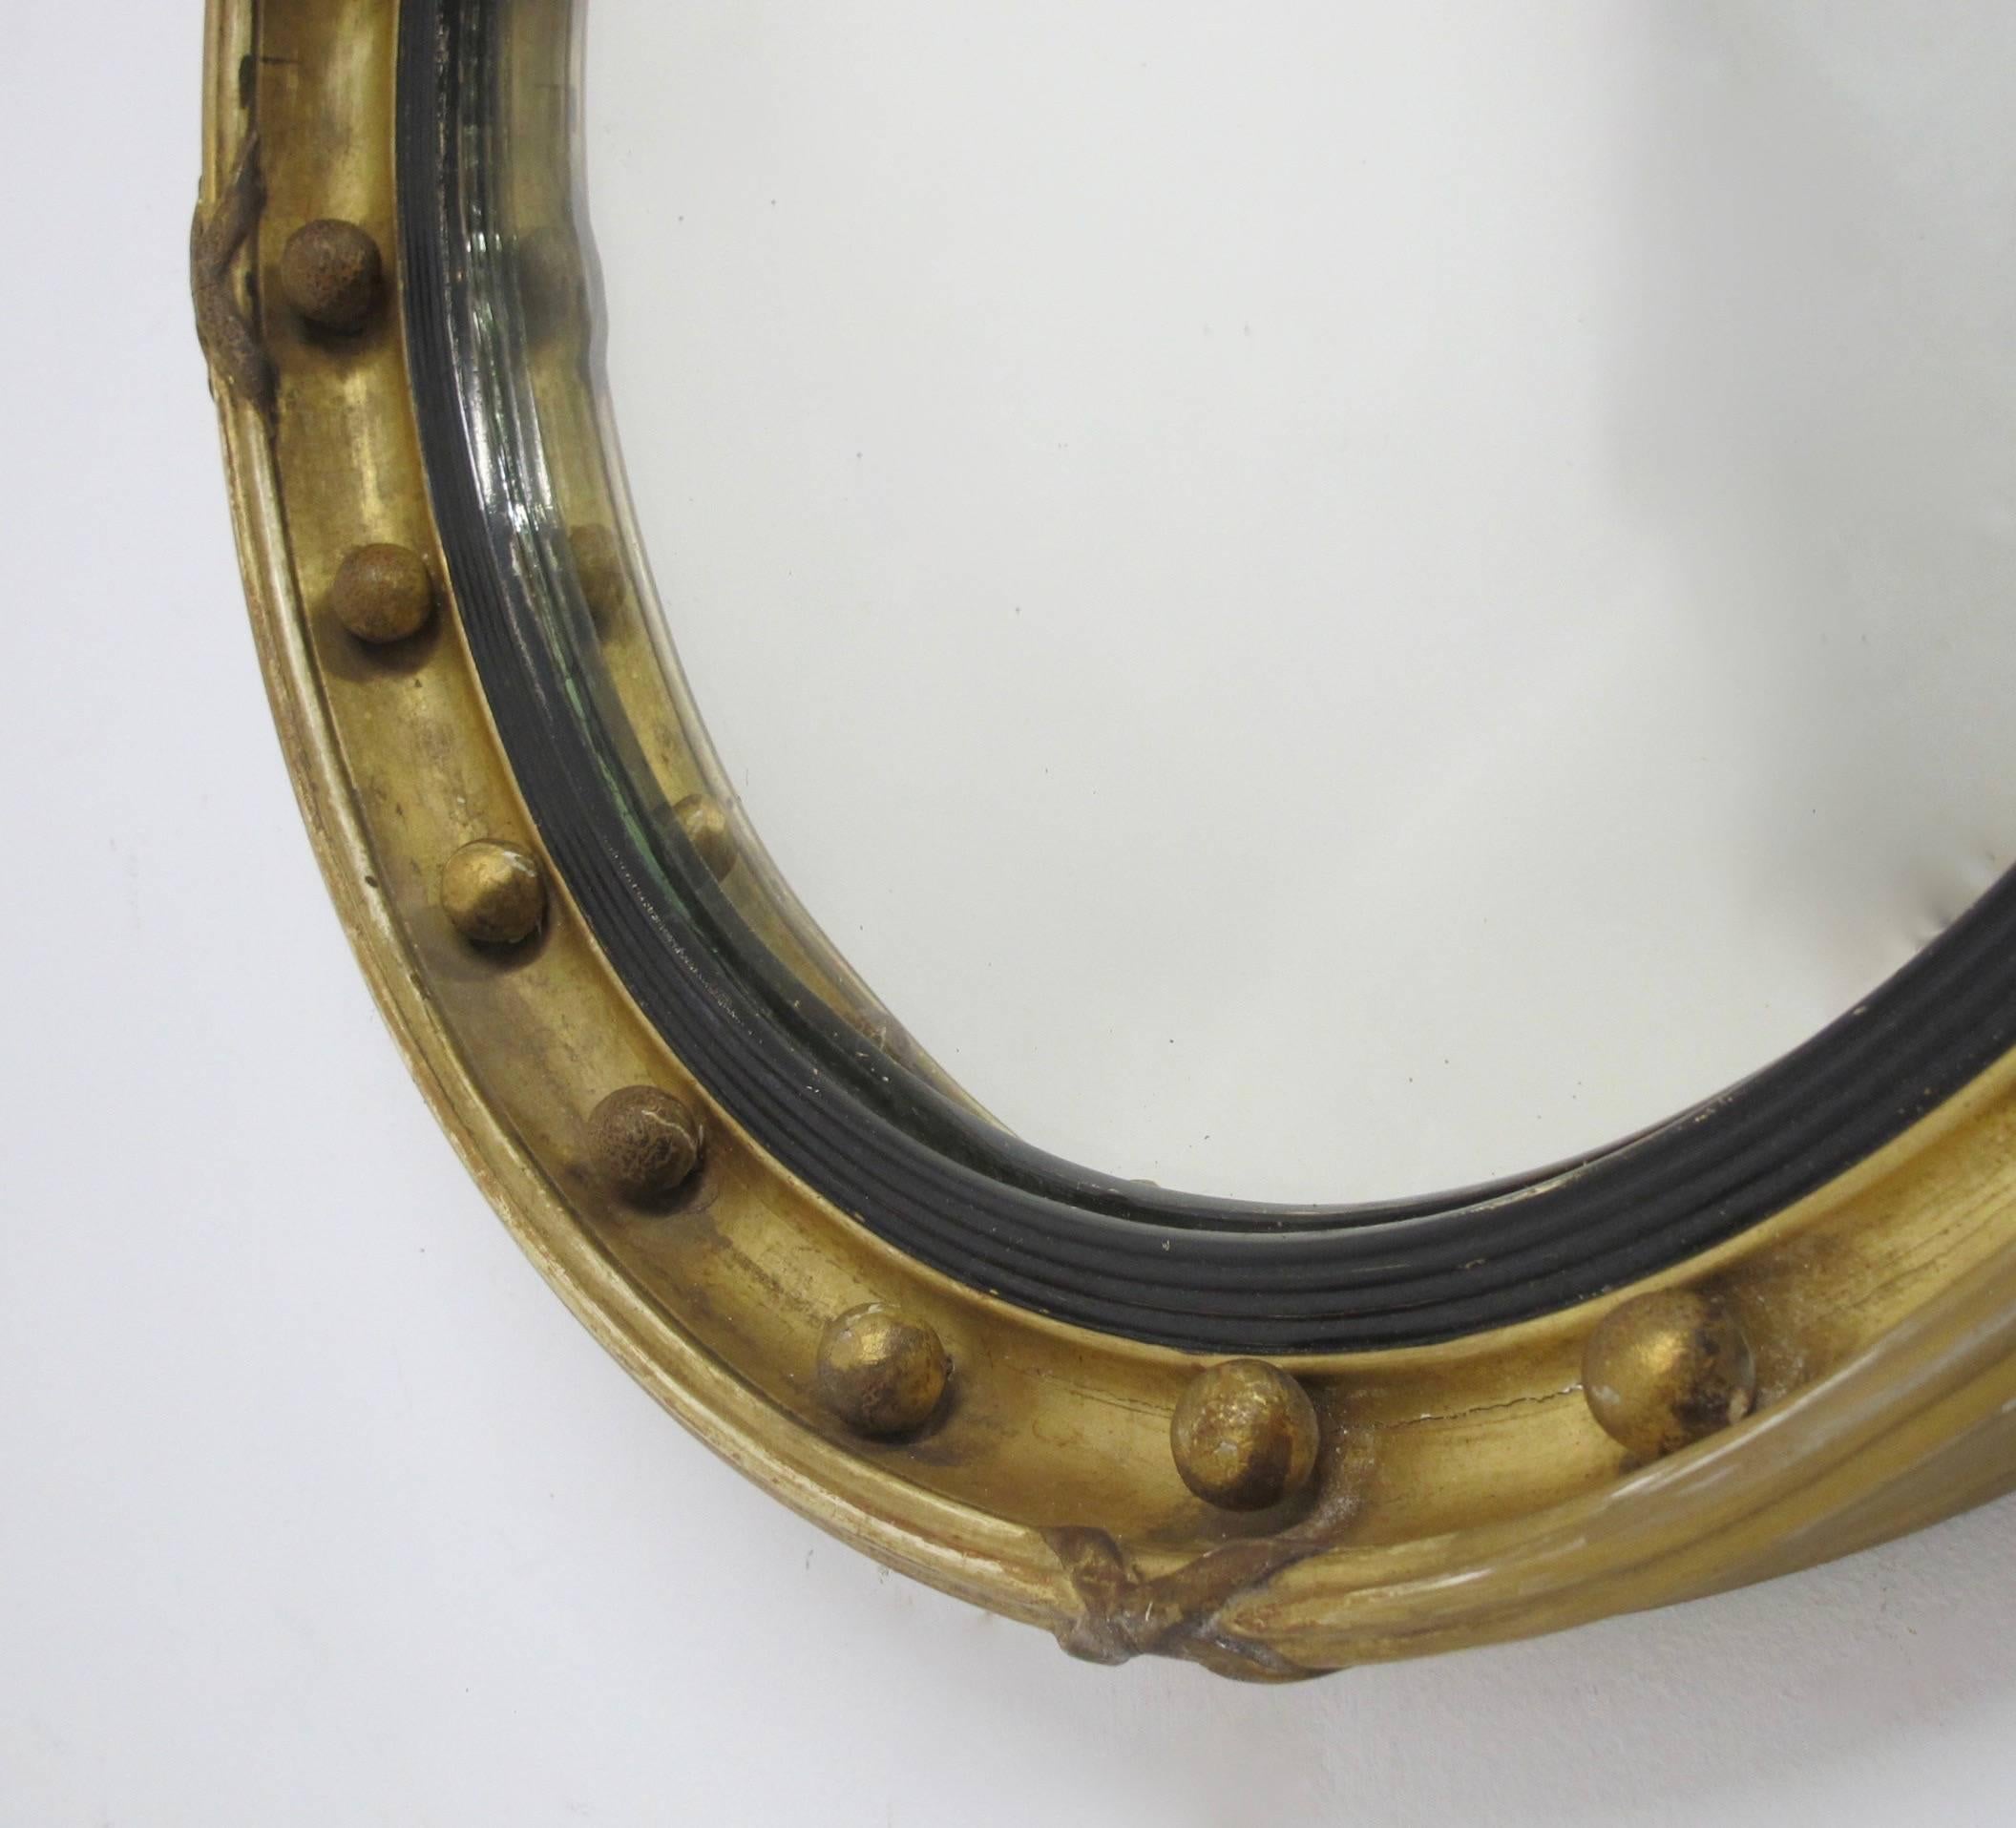 19th century wood frame with ribbed and ebonized inner band, worn gilt finish and original glass. Original mirror shows age spots and a small blemish or flake on the left side.